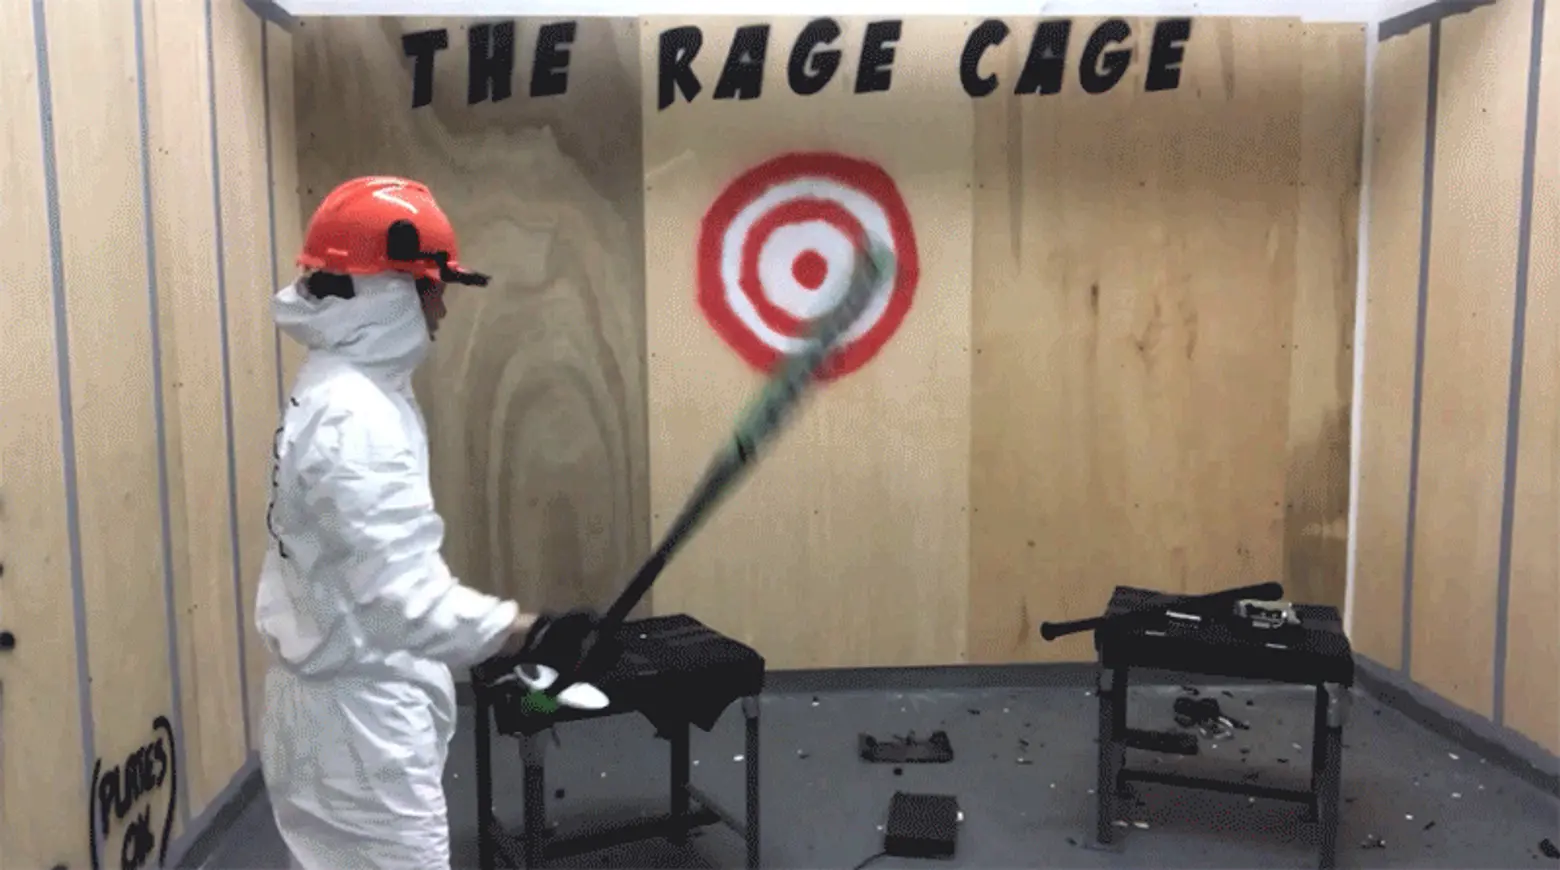 Pay to break stuff for fun at these ‘rage rooms’ in NYC